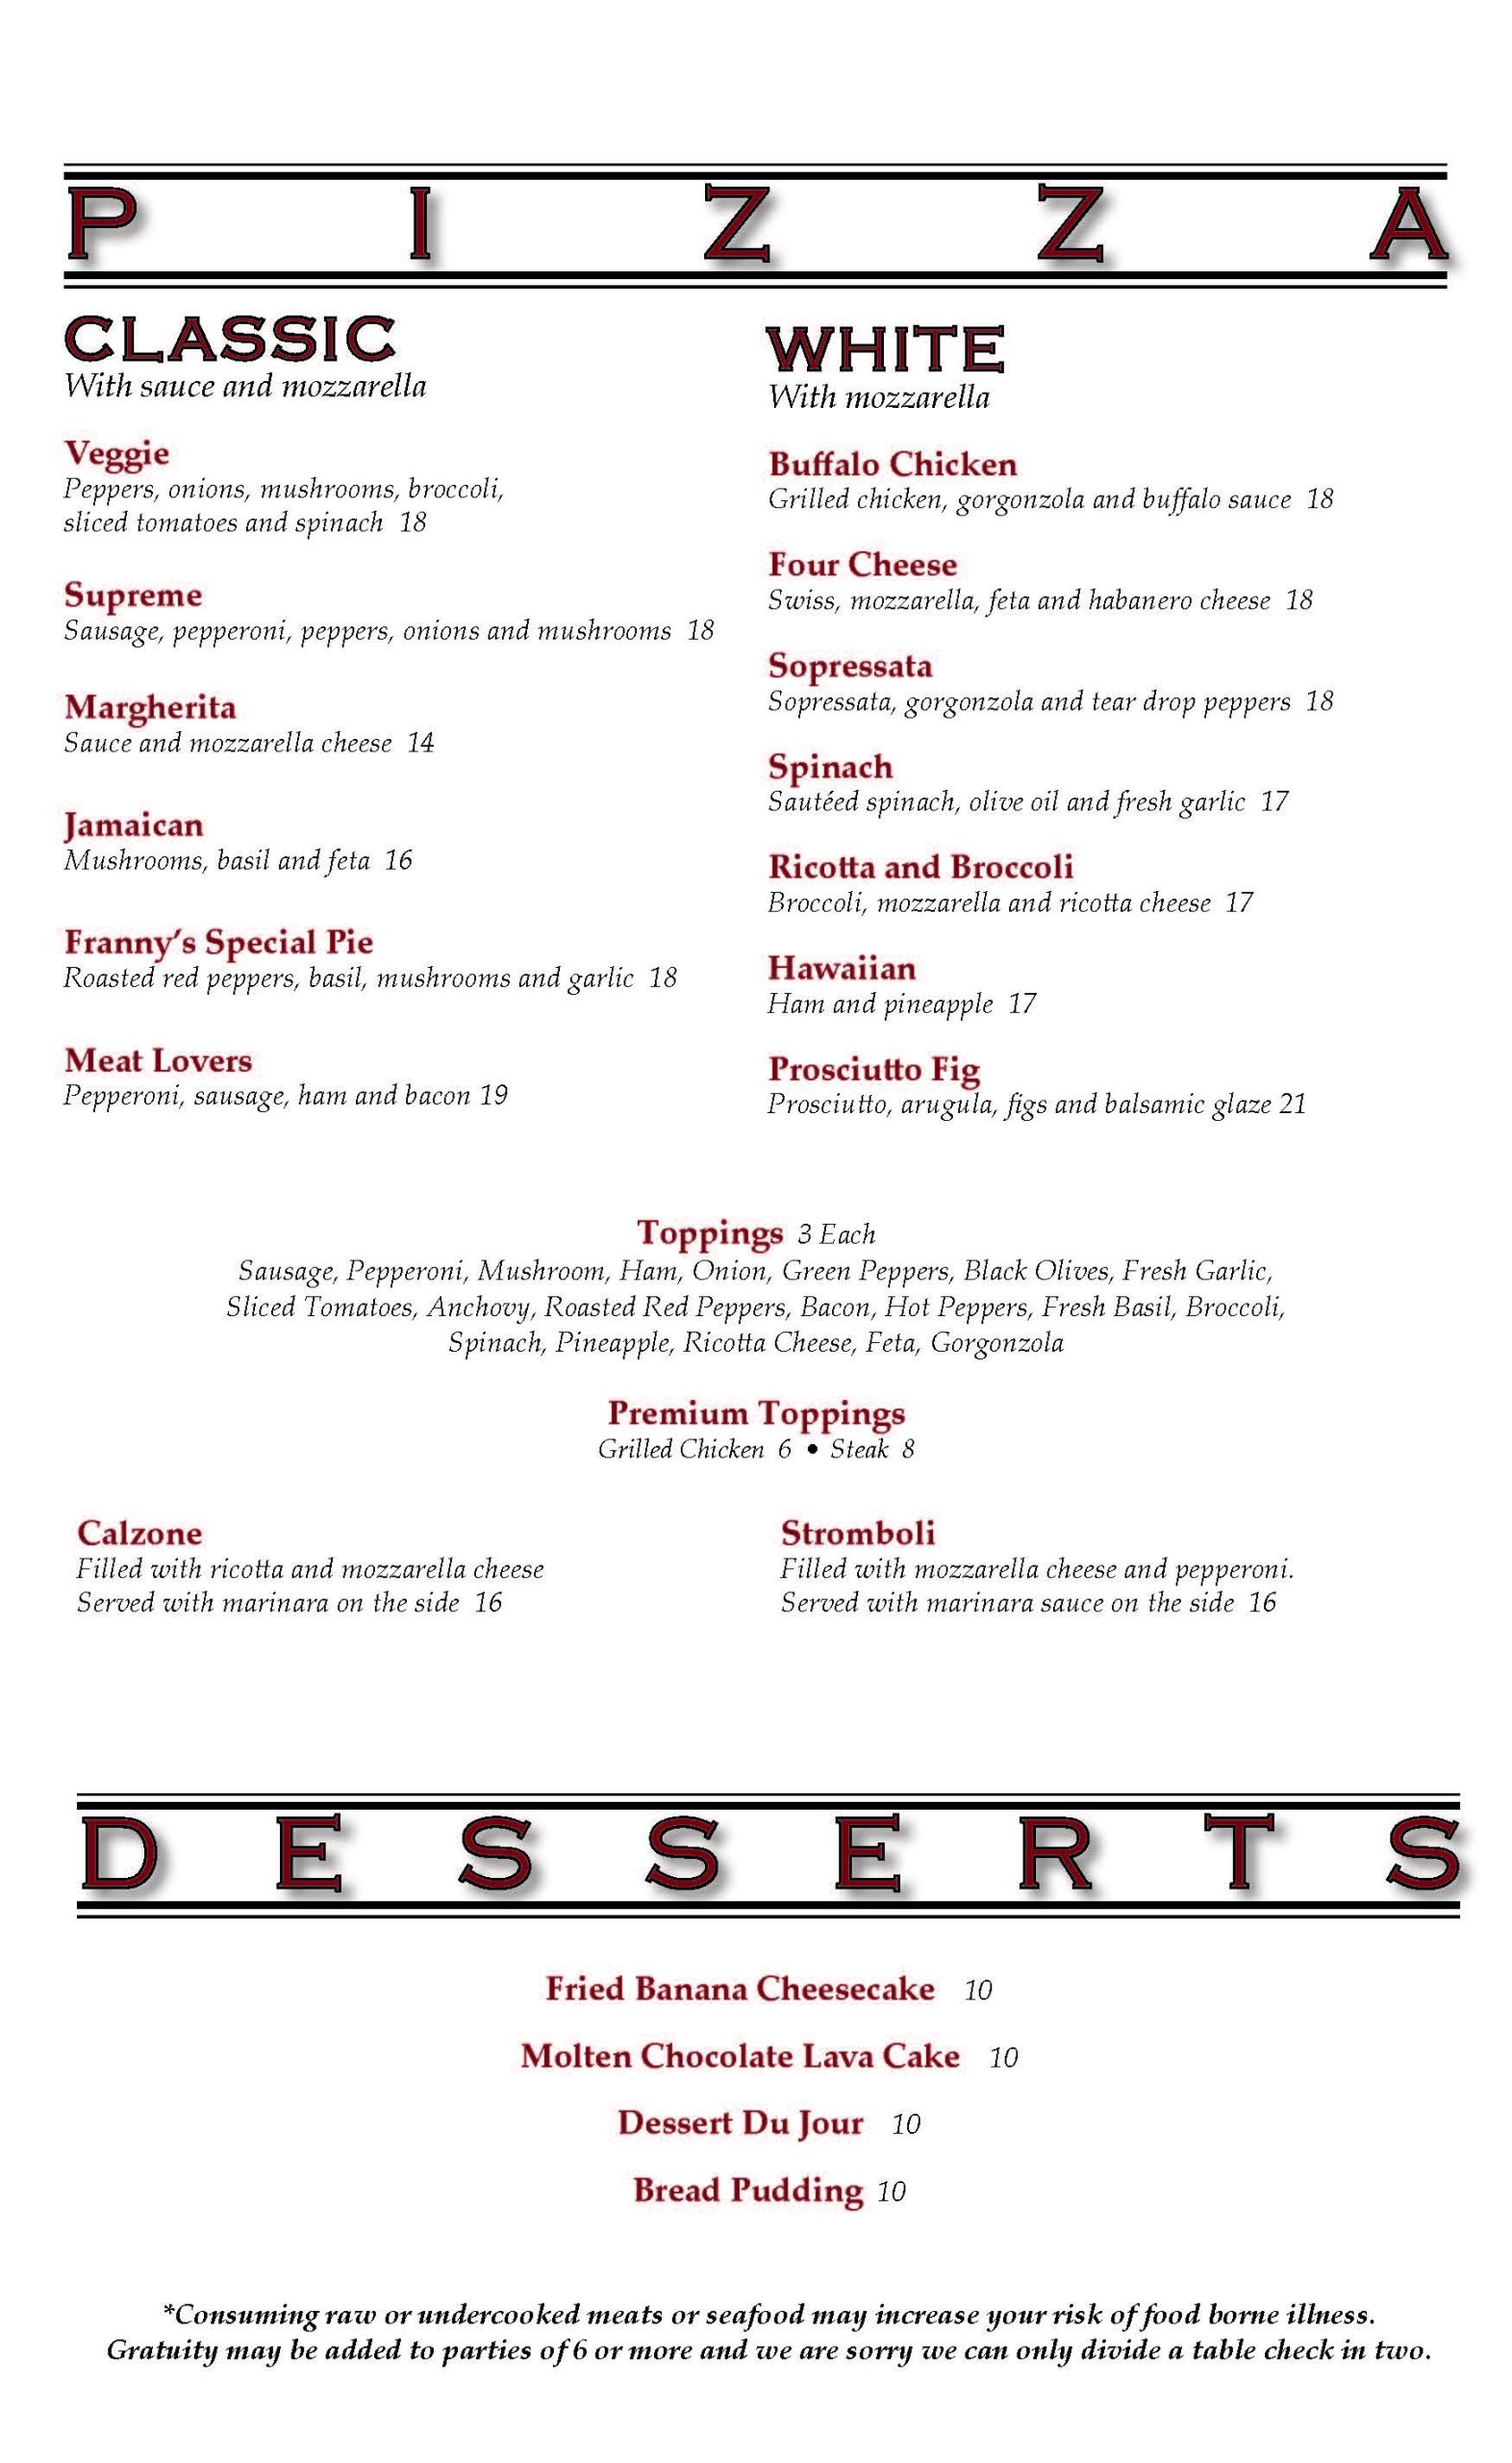 A menu for a pizza and desserts restaurant.